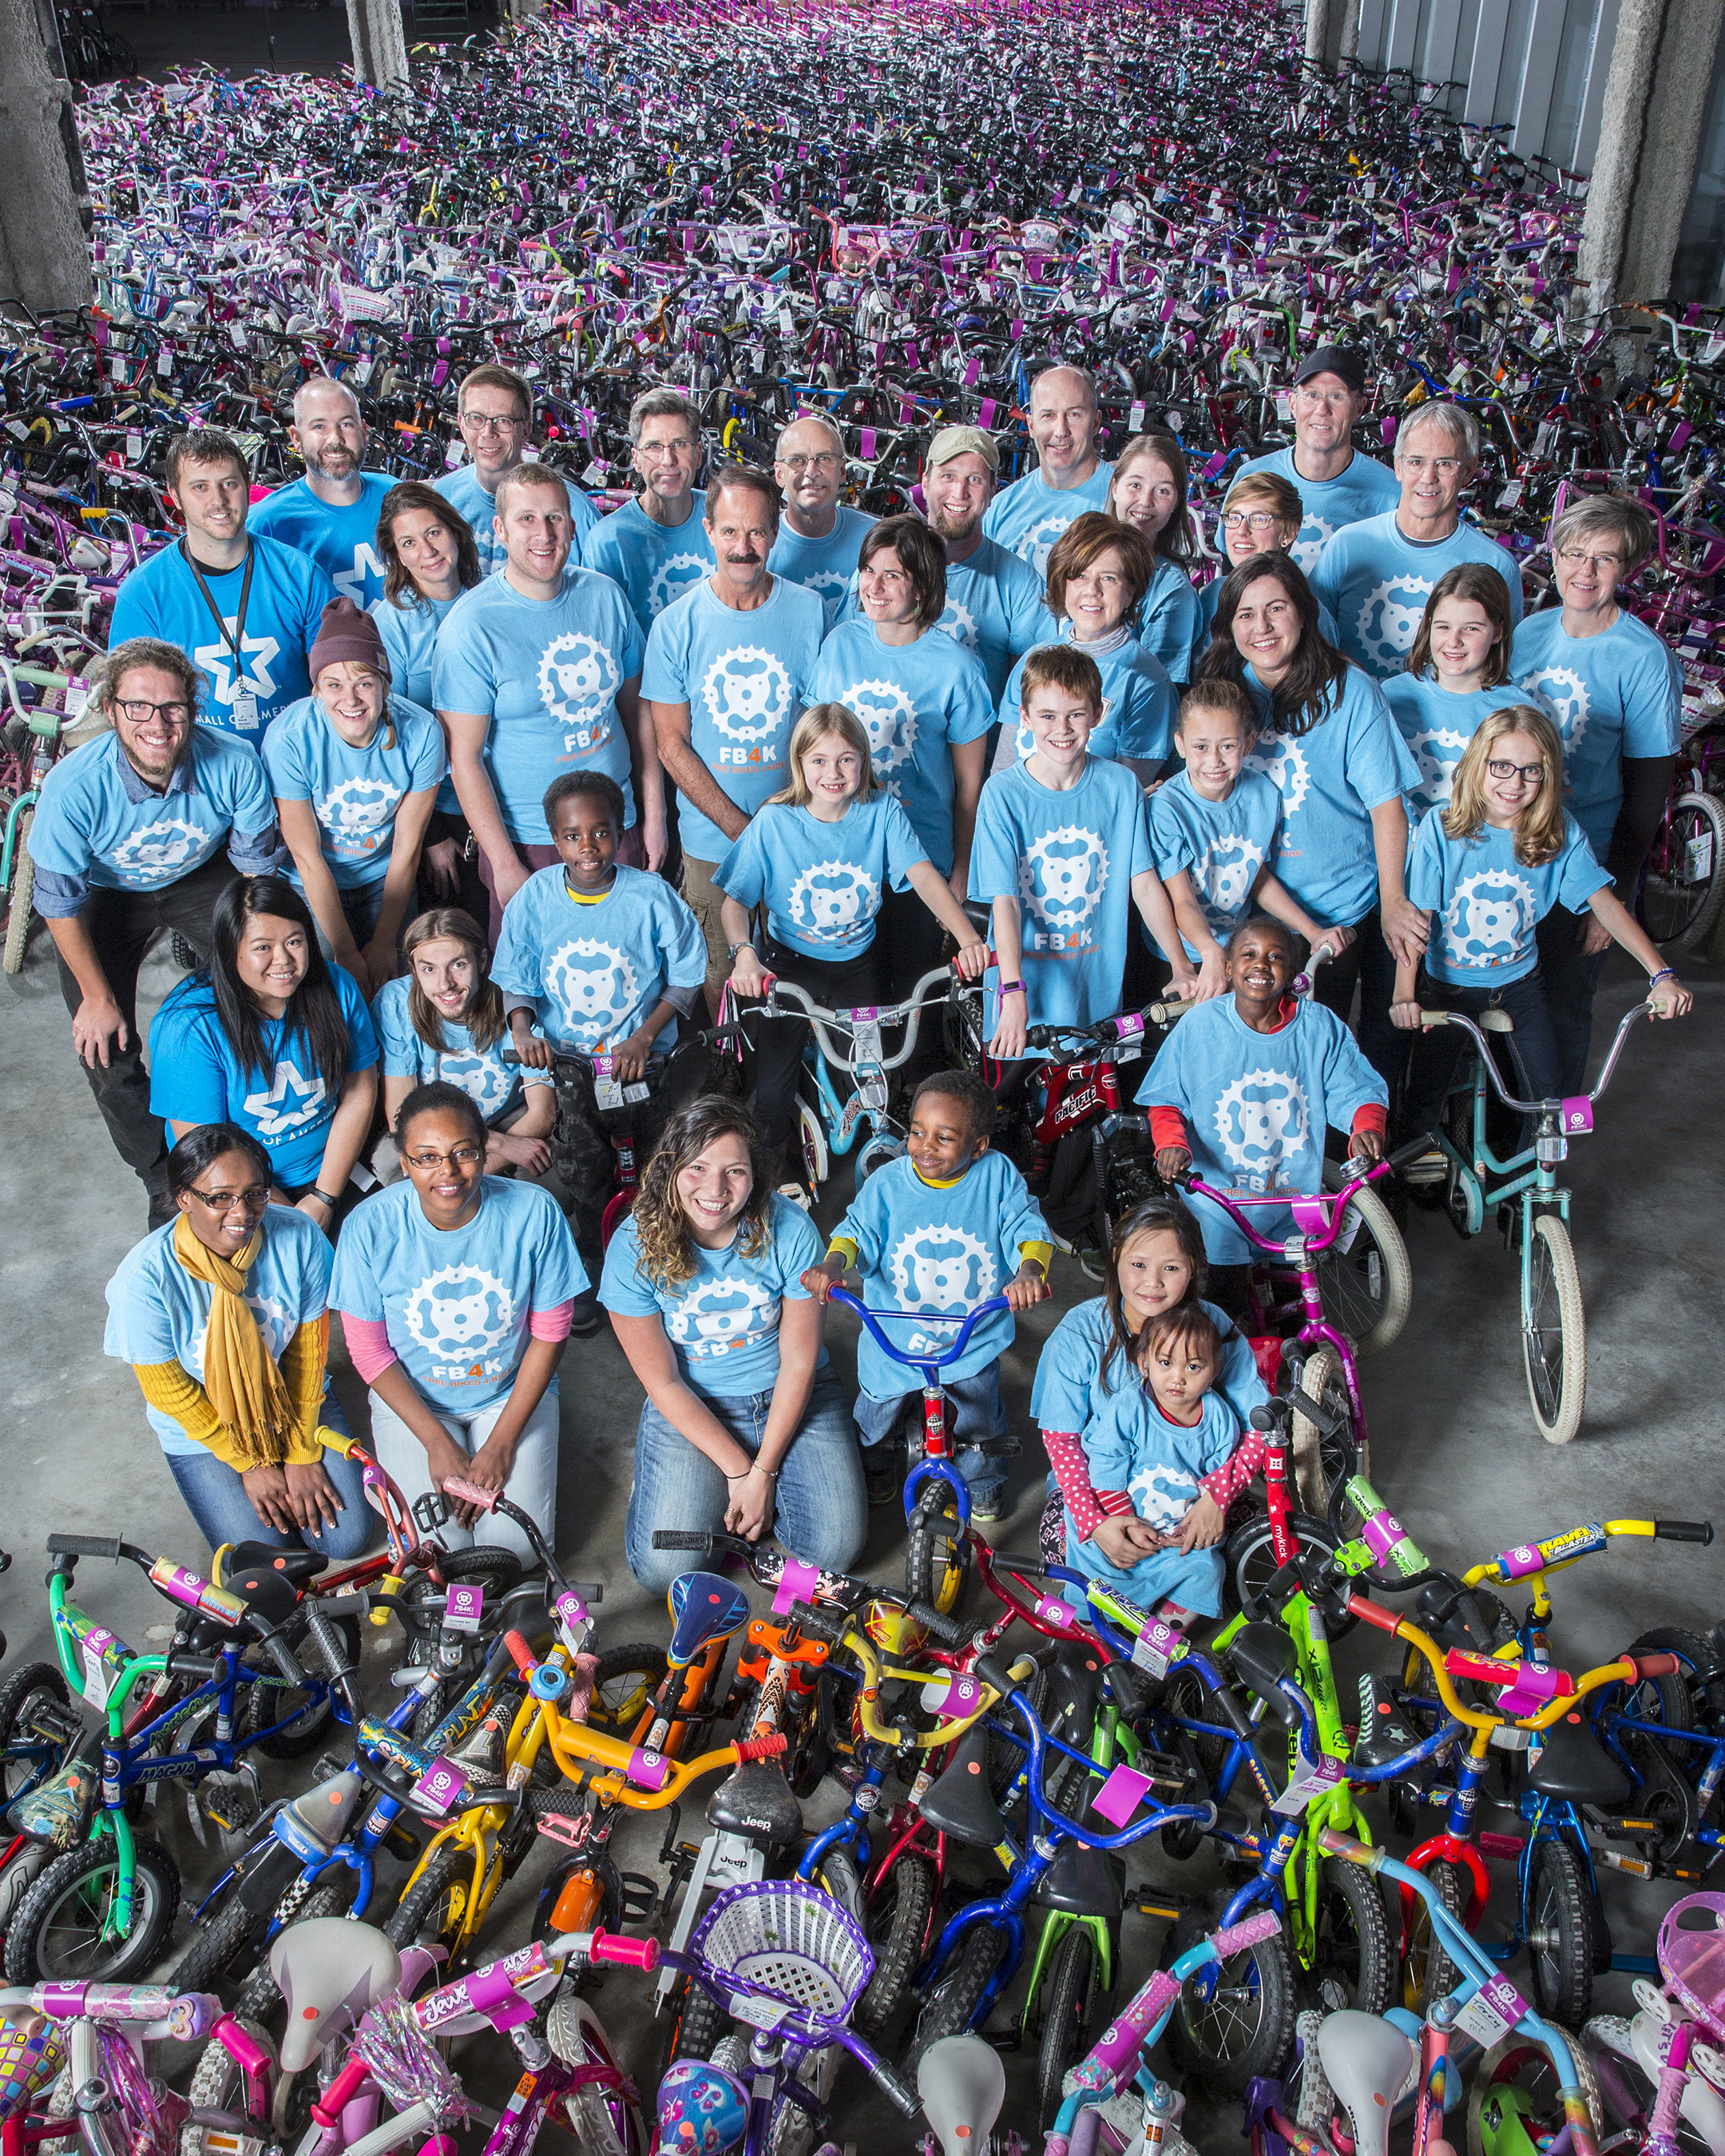 Free Bikes 4 Kidz and Mall of America team up to break the Guinness World Record for the most bicycles donated to charity in 24 hours.